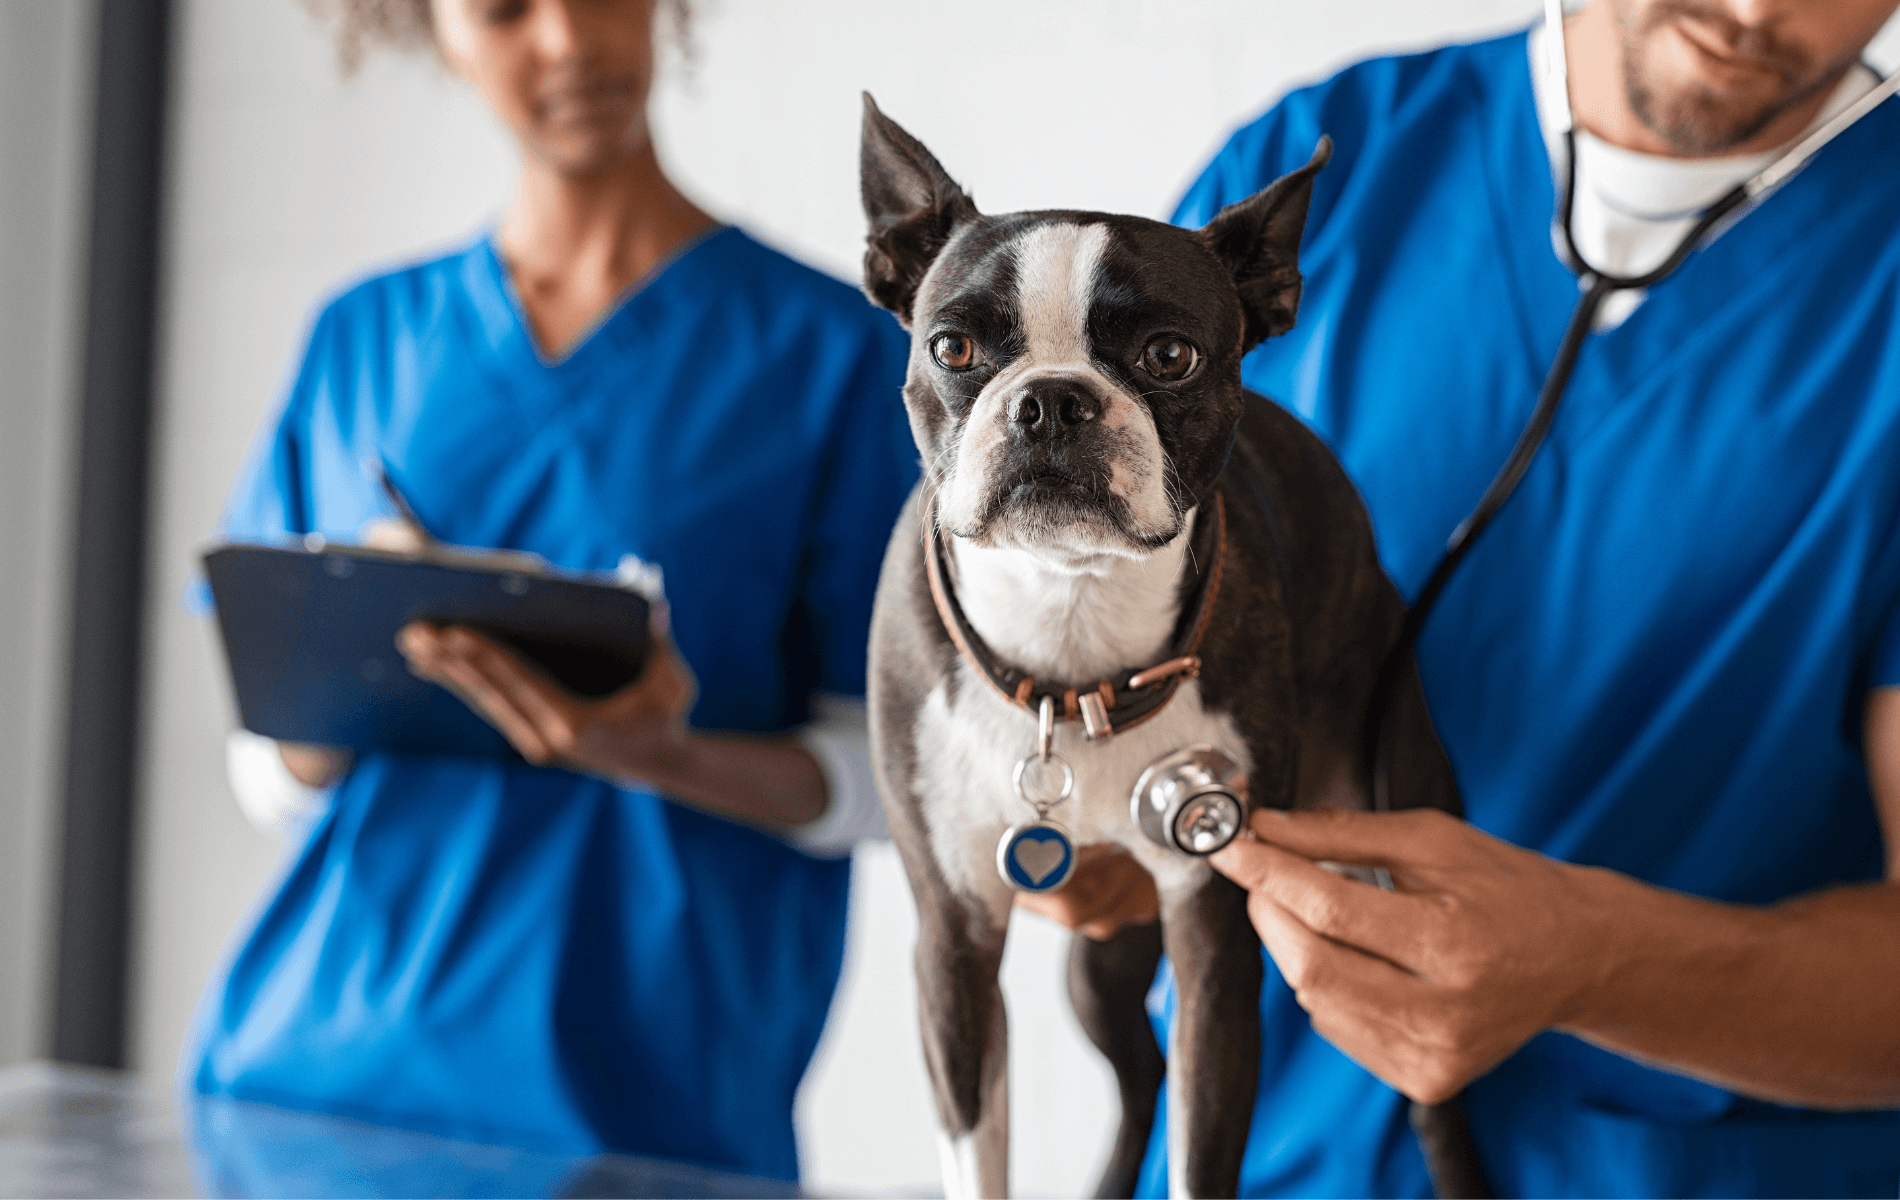 A dog with a stethoscope on it